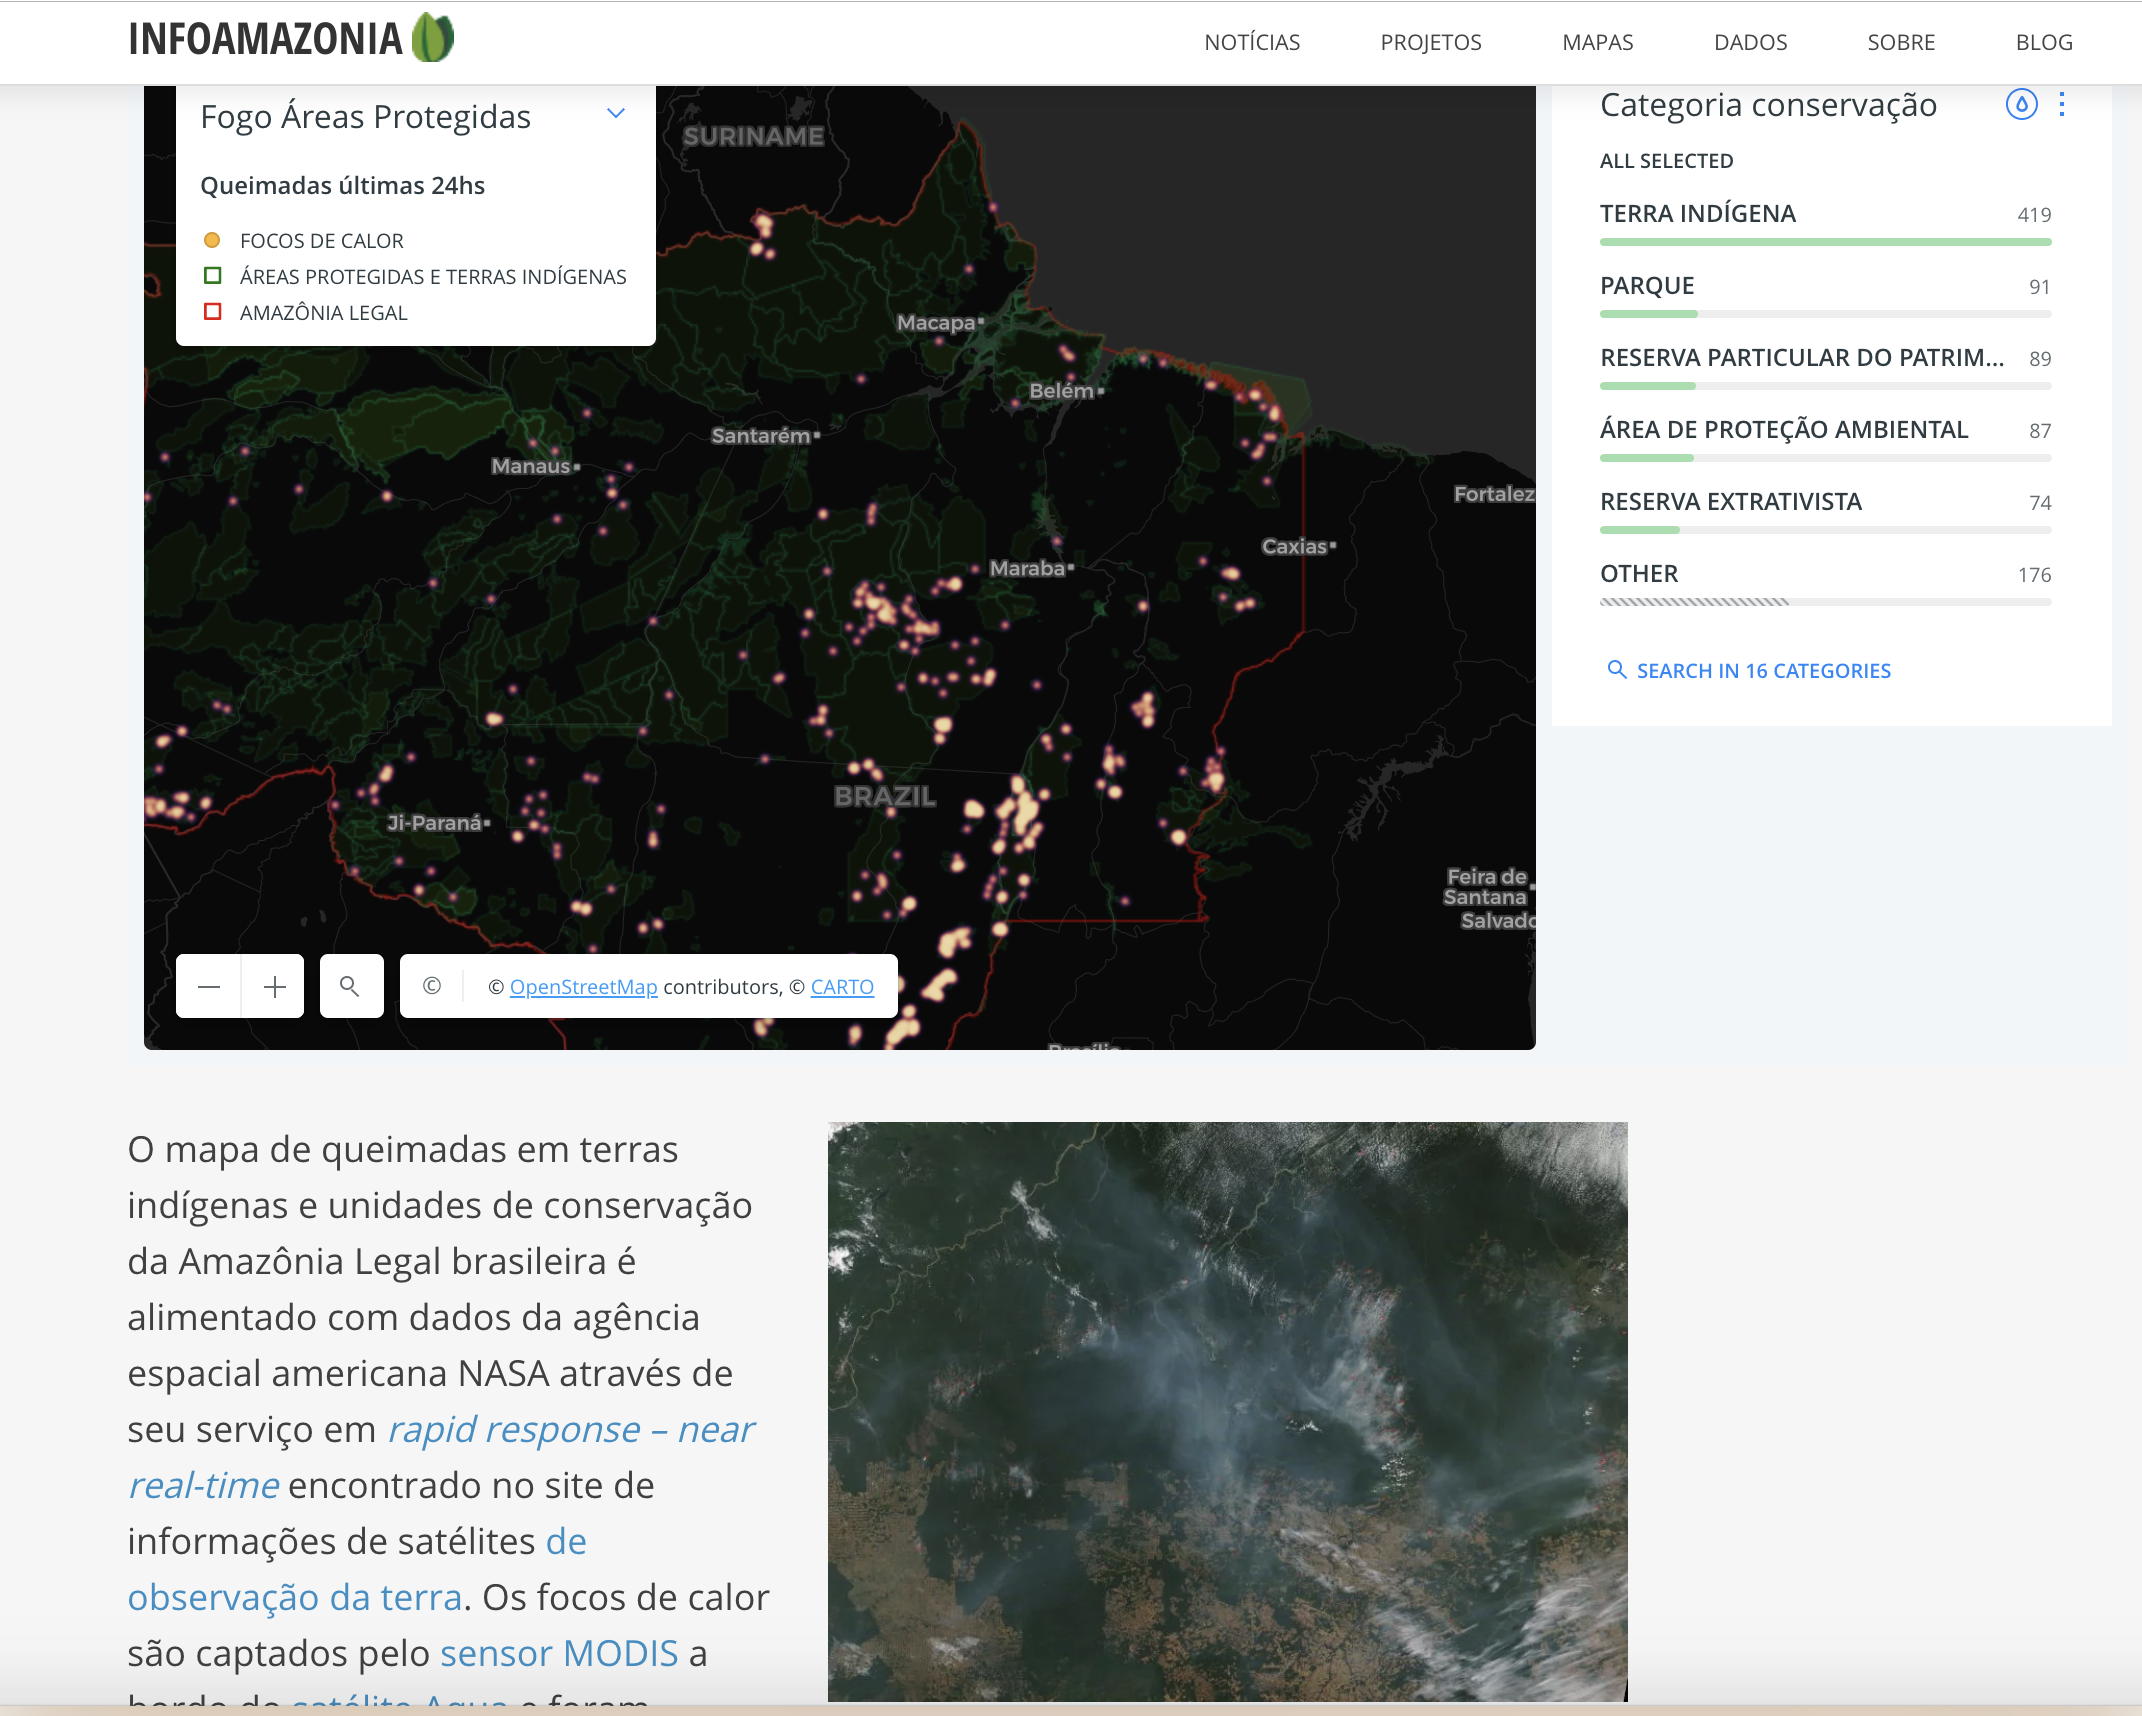 Screenshot of web page showing the InfoAmazonia map and photos